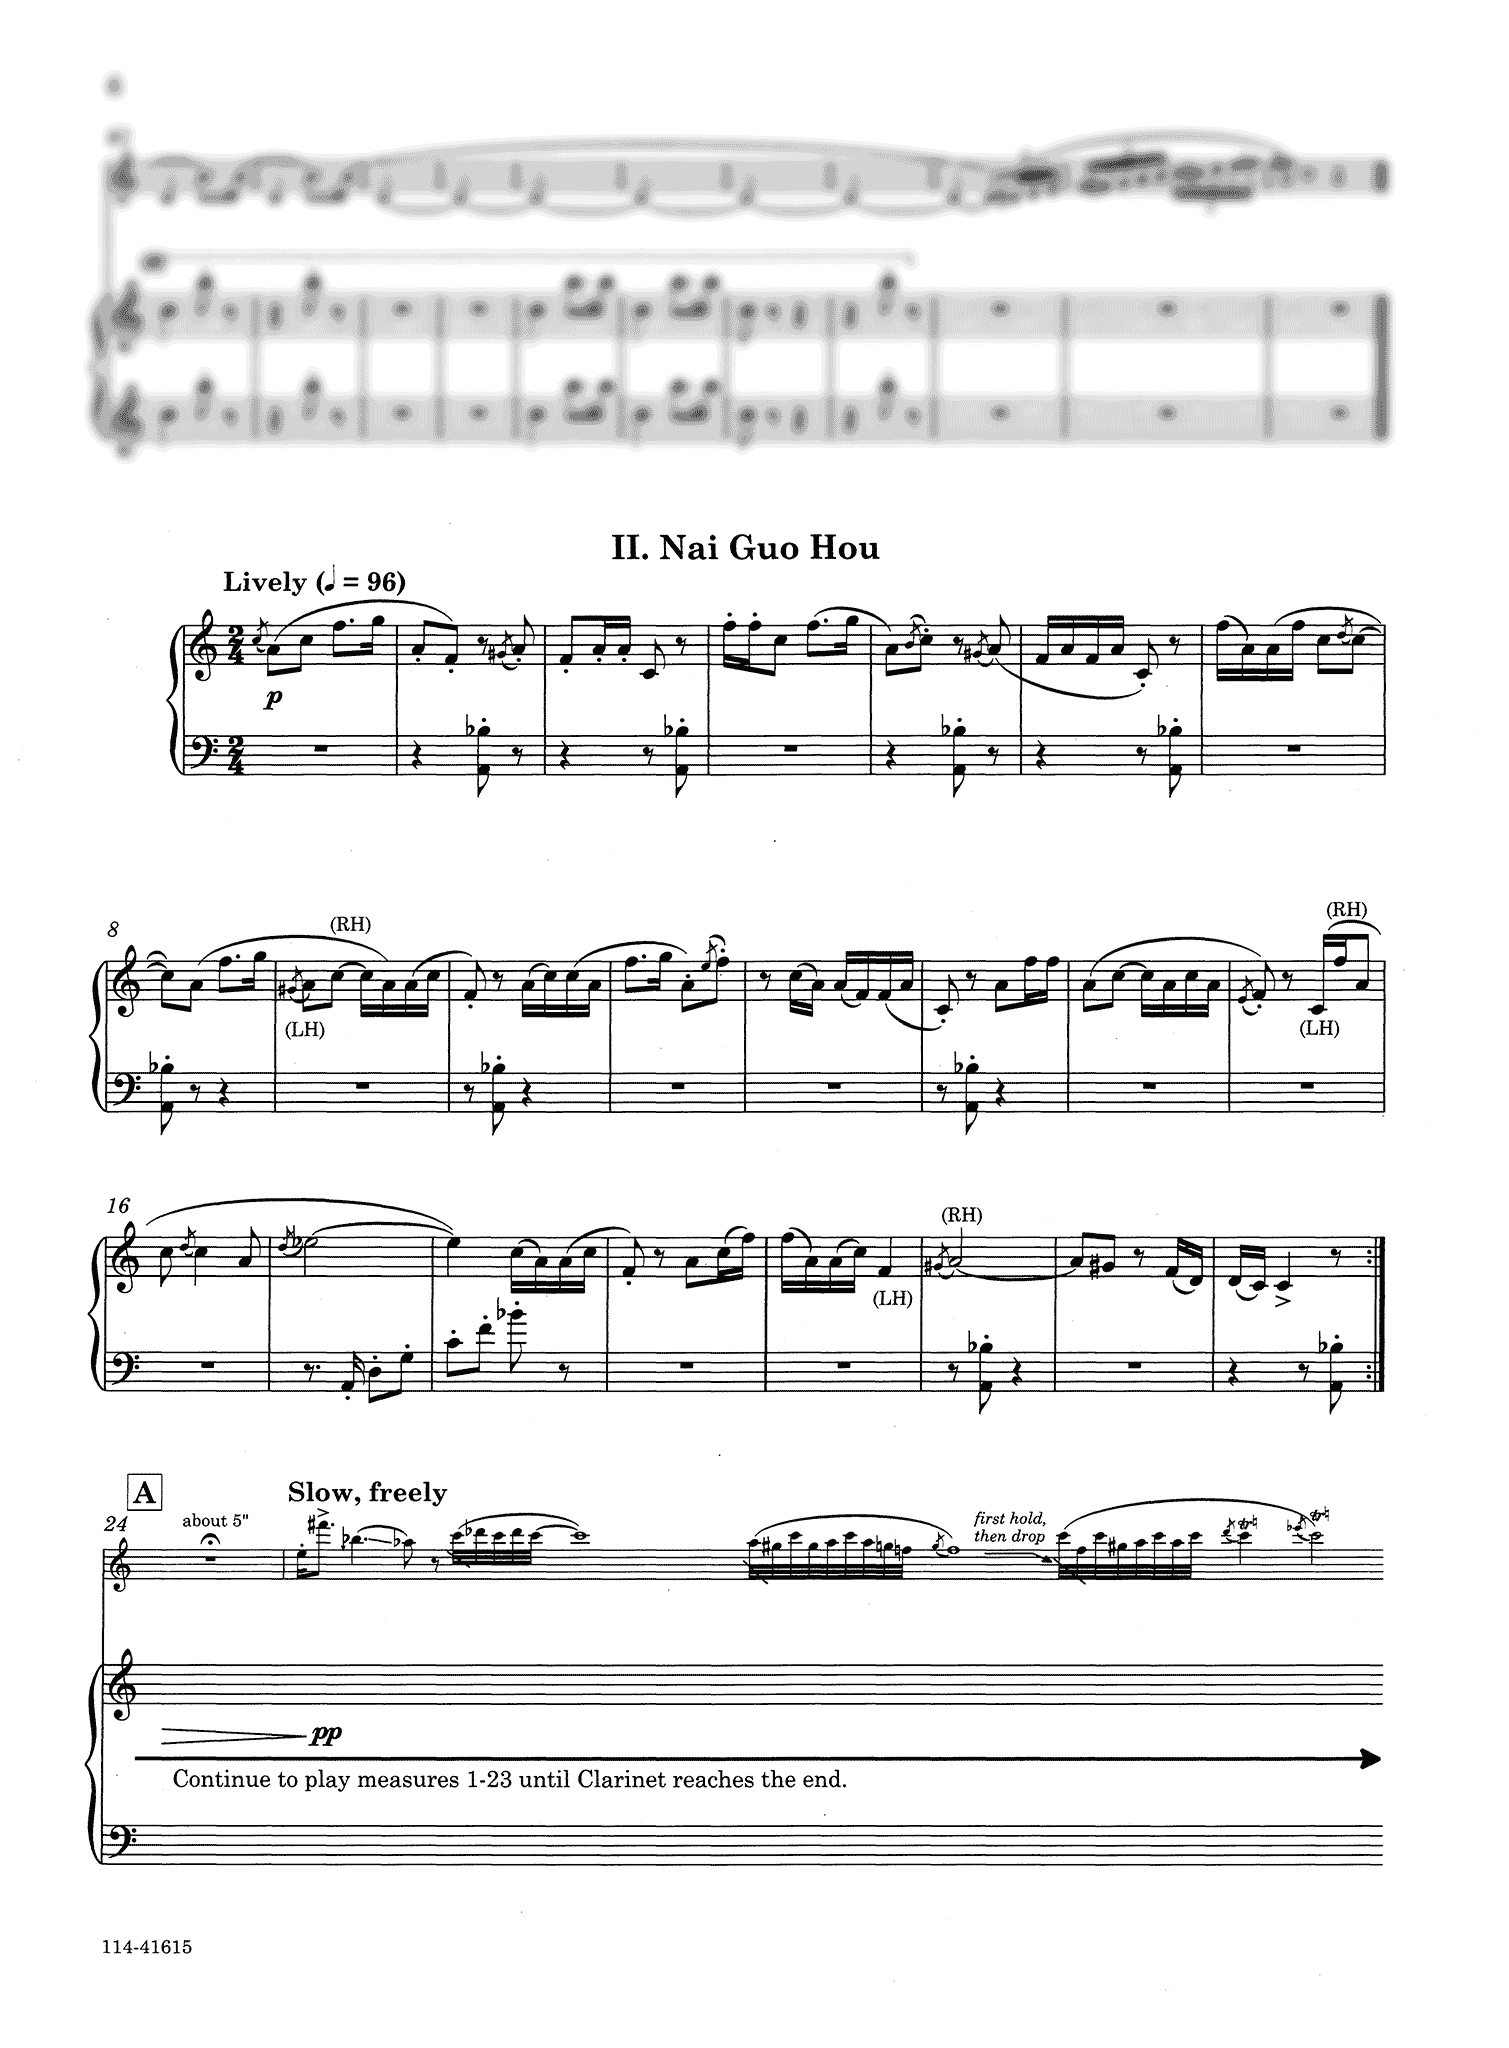 Chen Yi Three Bagatelles from China West clarinet and piano - Movement 2